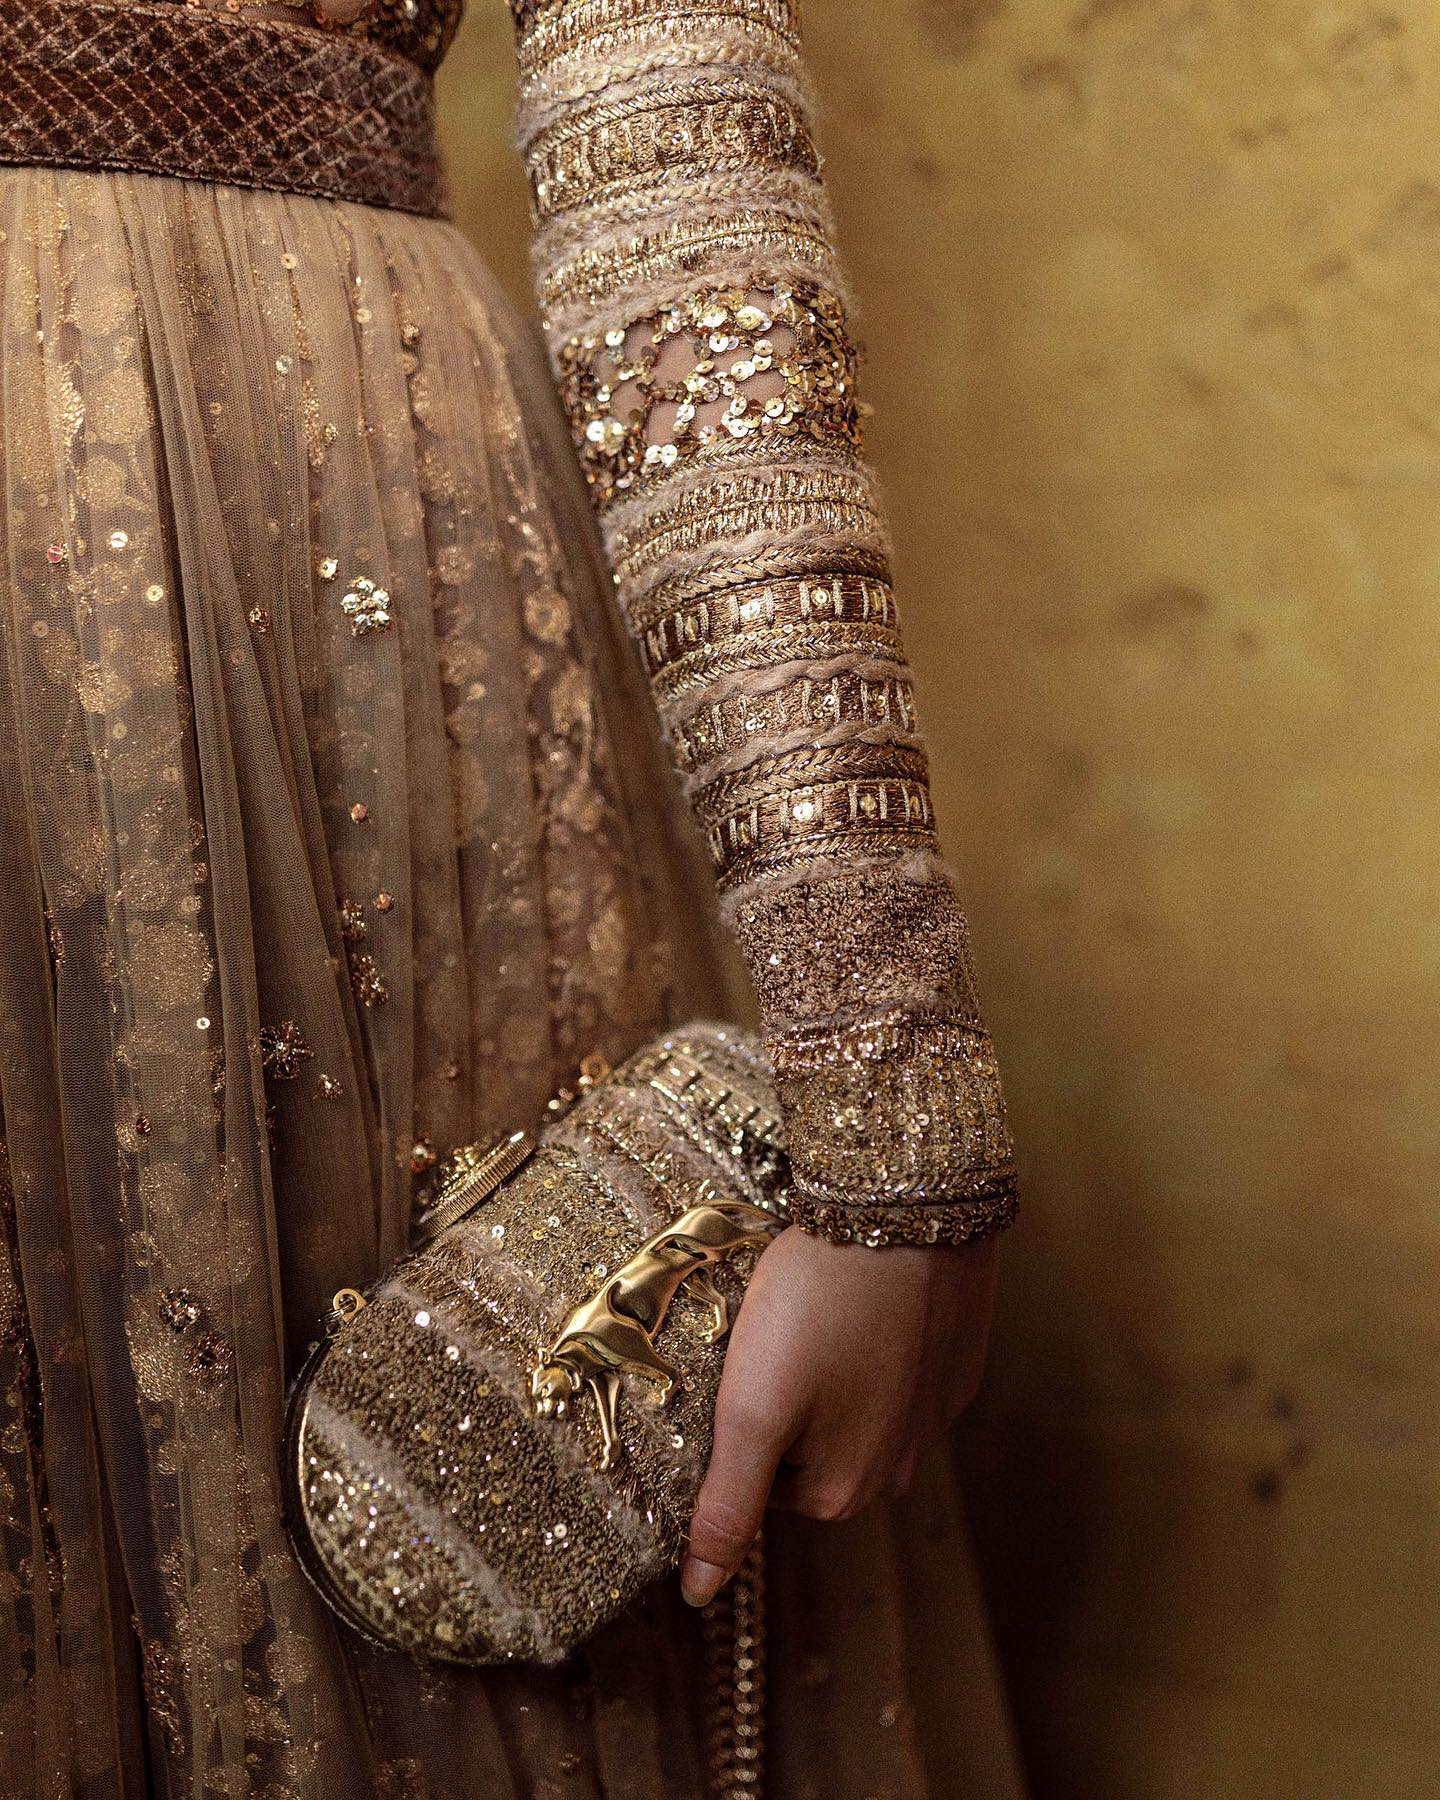 Couture 2022 Is A Glamorous Dusty Golden Collection By Sabyasachi